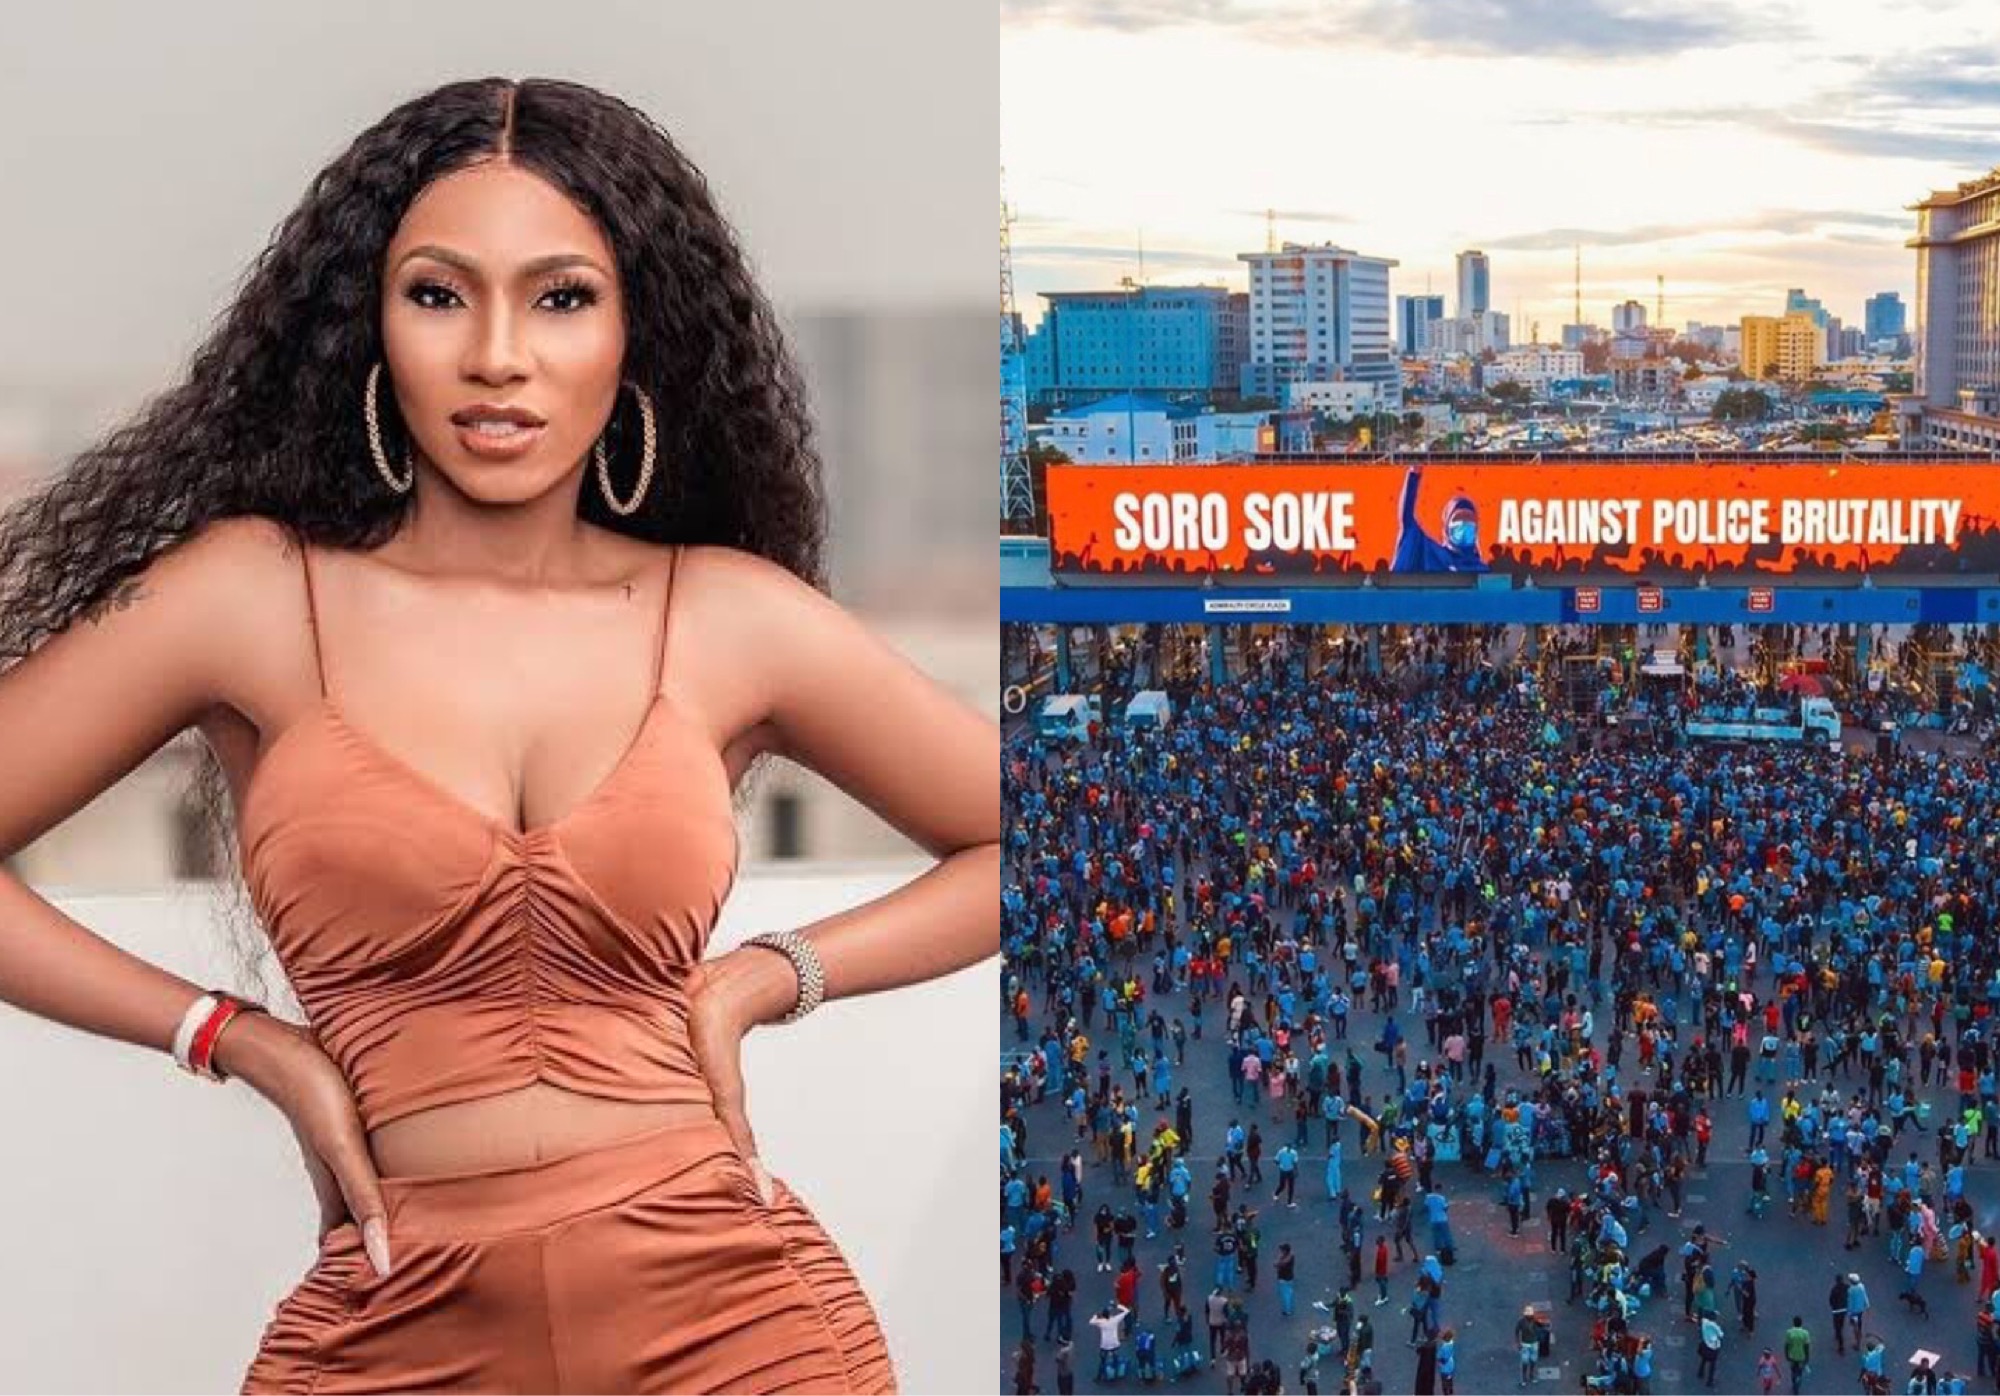 #EndSARS: “It Is So Sad That Our Political Leaders Have Failed Us” - BBNaija’s Mercy Eke